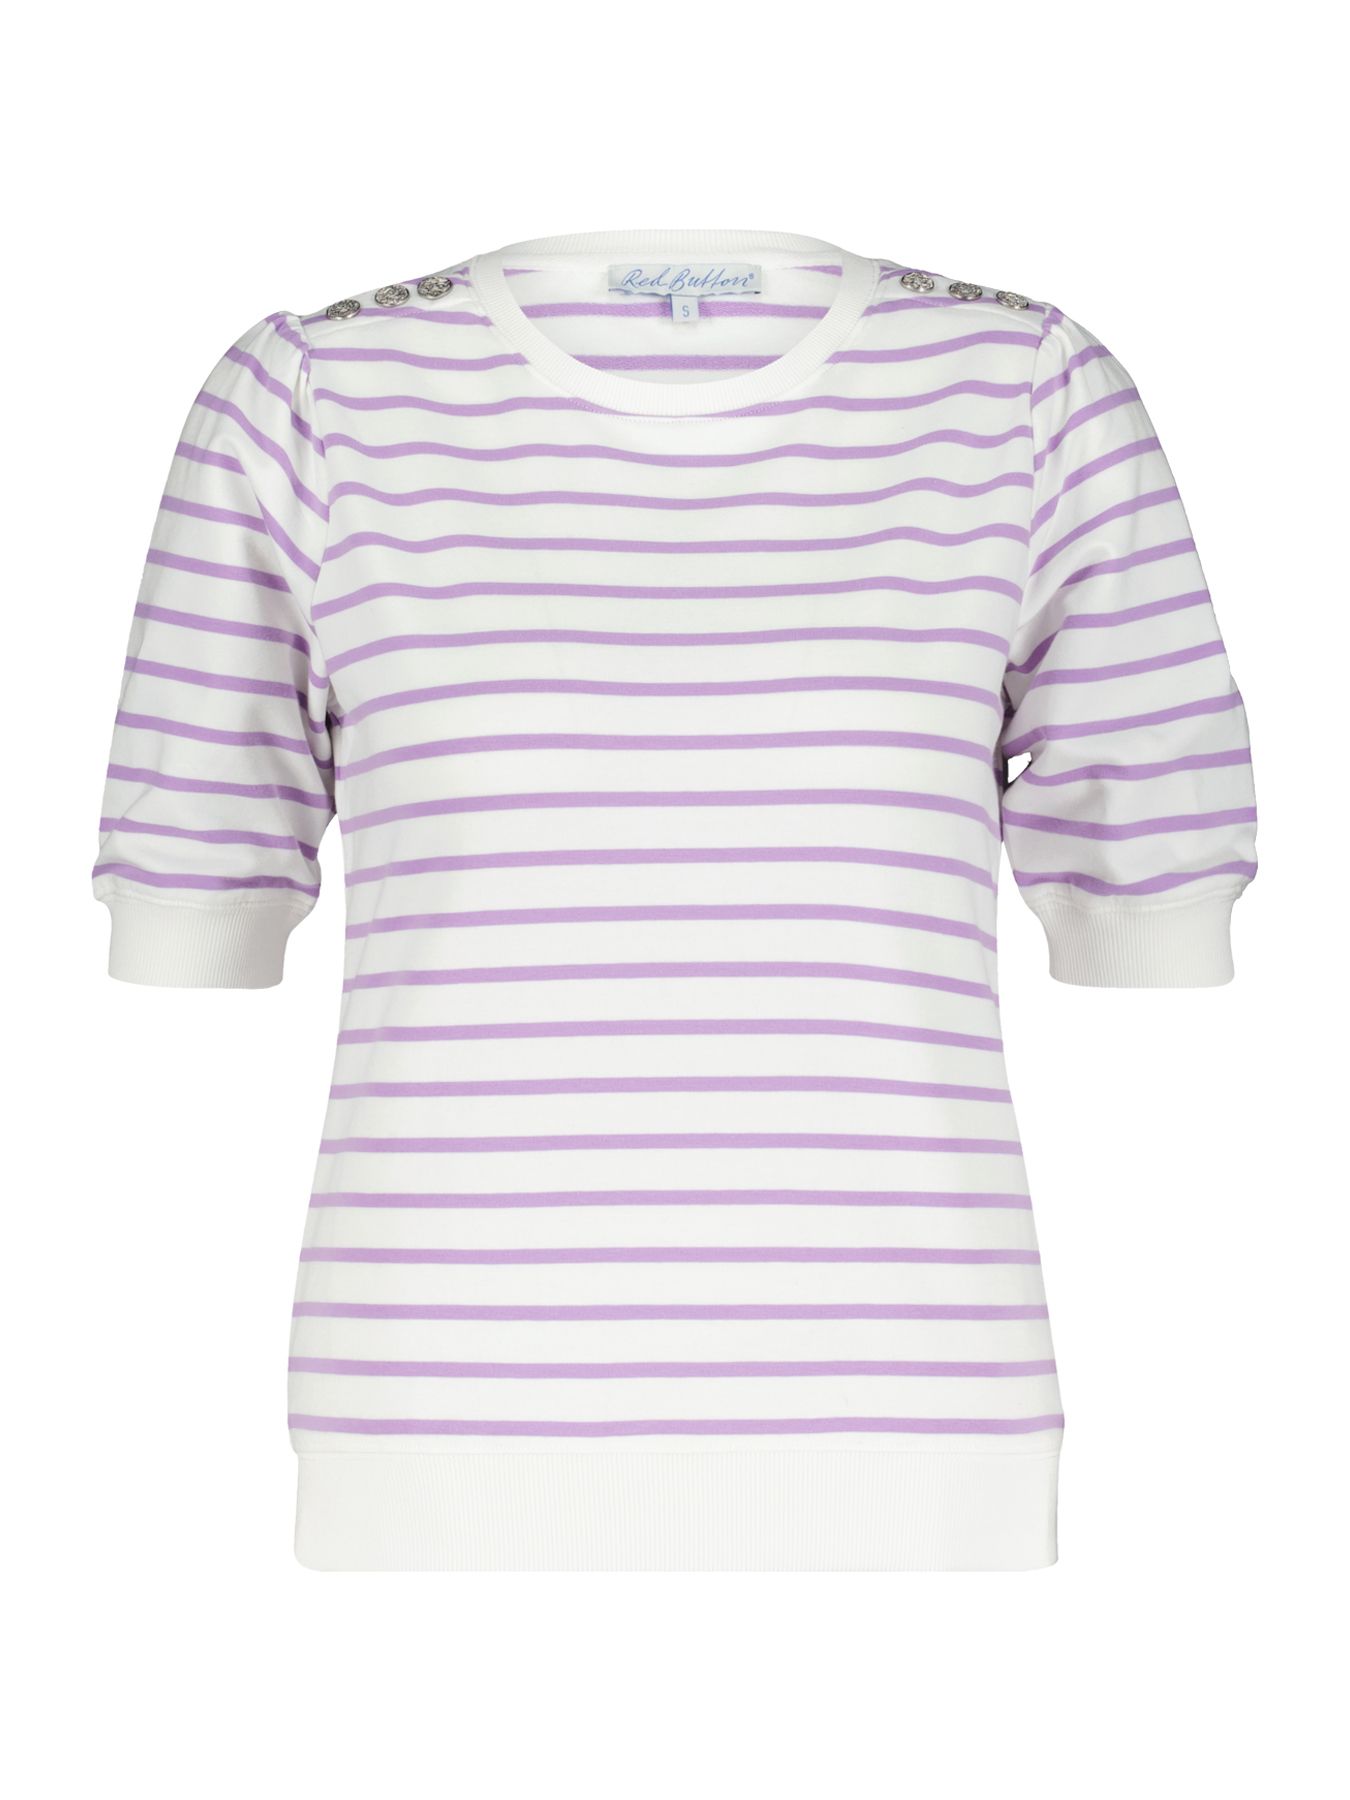 Red Button Terry stripe short sleeve lilac76 00105022-EKA26007300000052